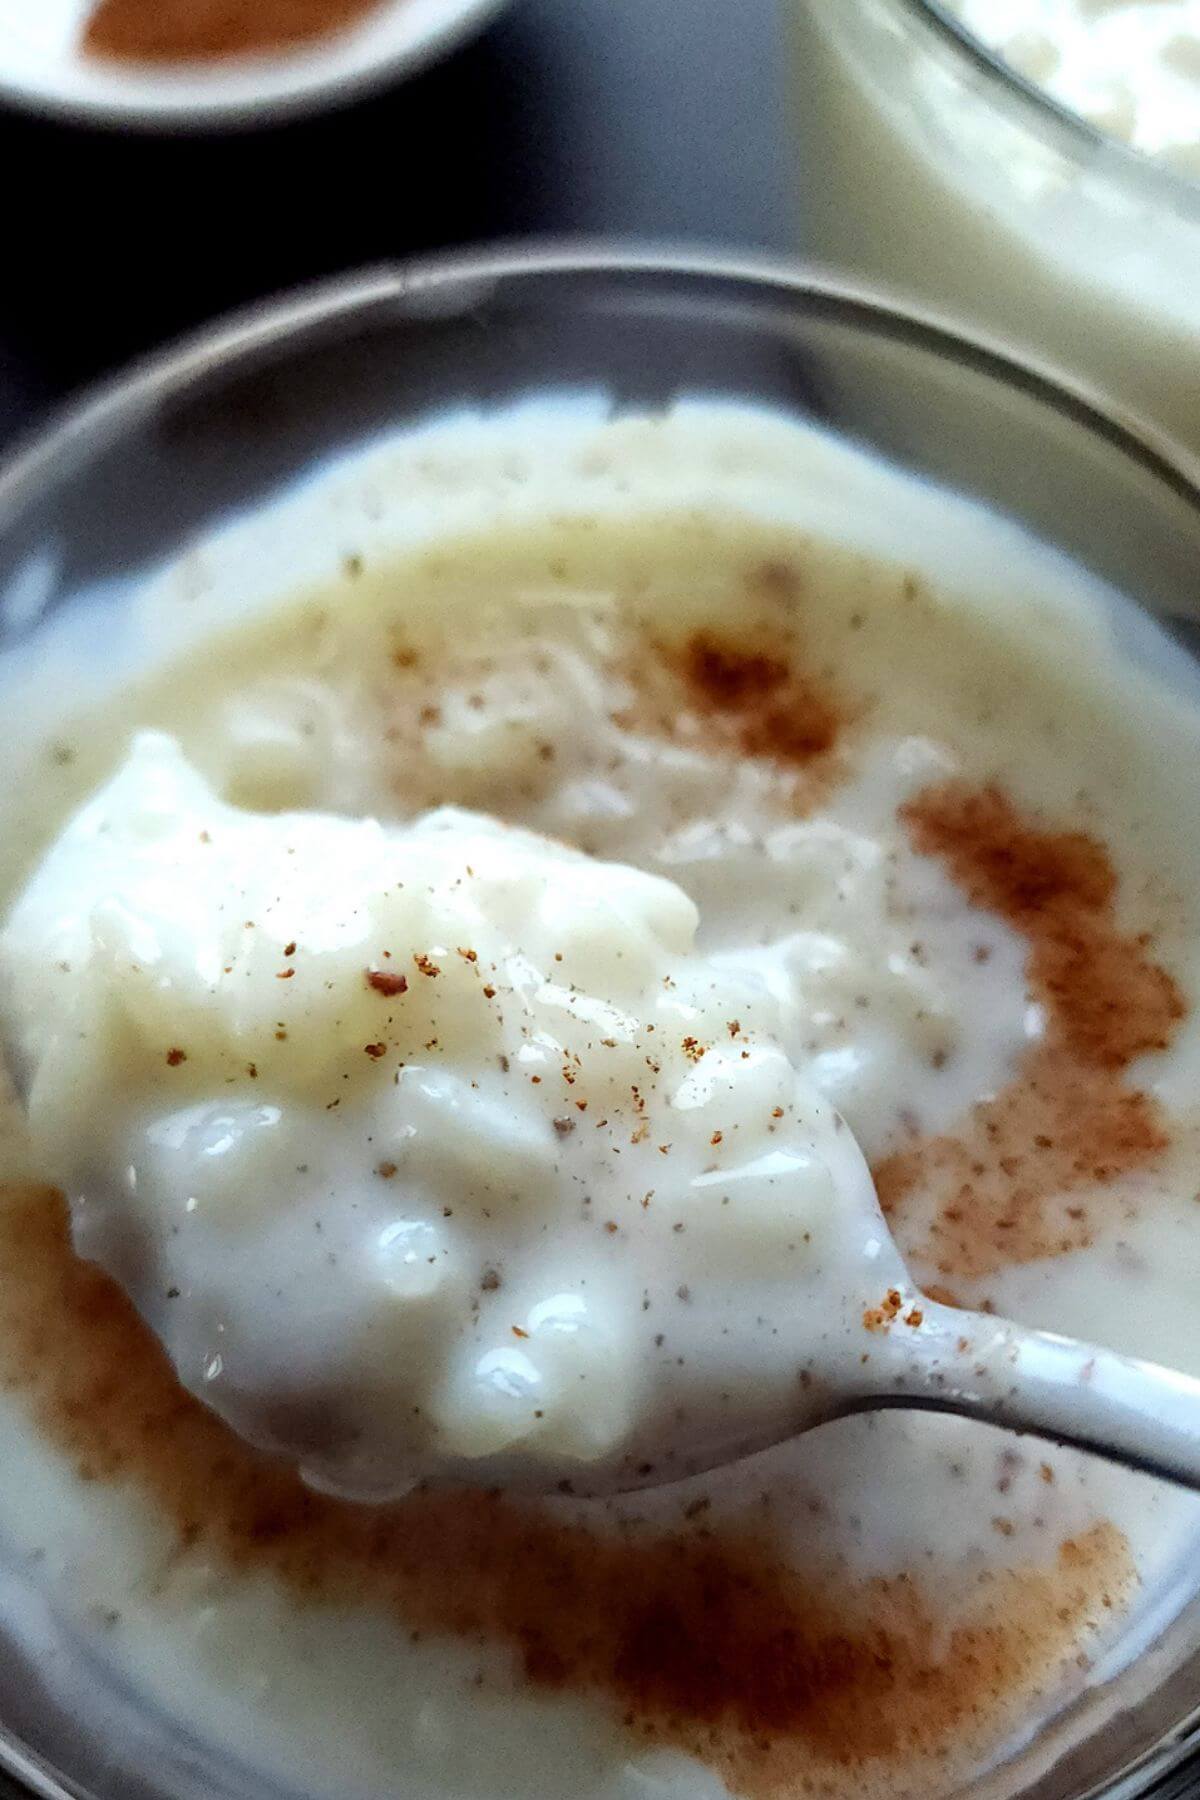 A spoonful of rizogalo held over a bowl of pudding.